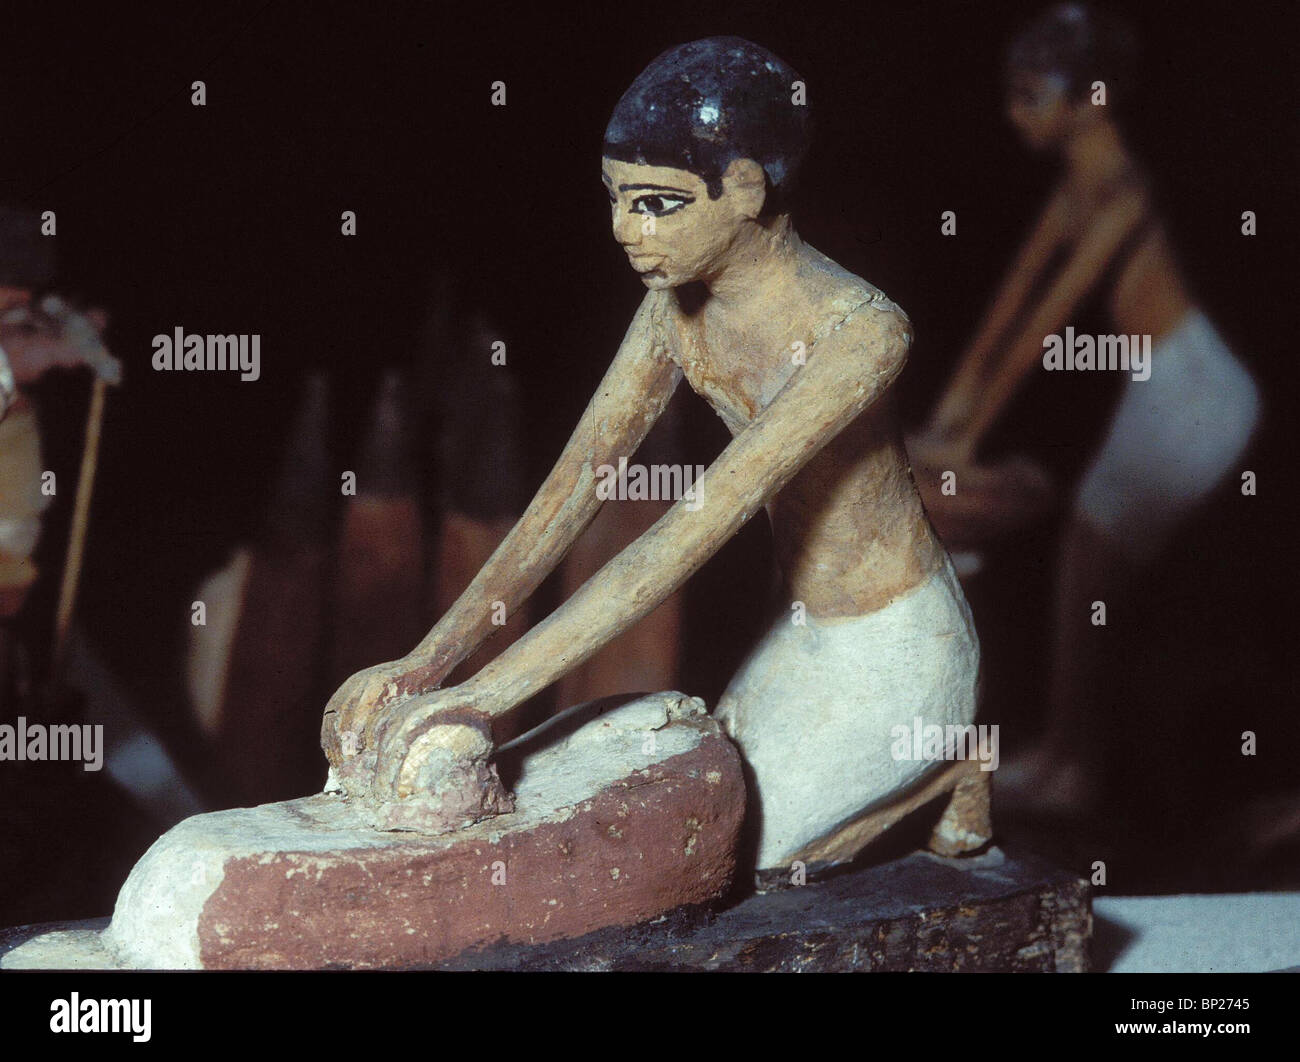 1446. WOODEN FIGURINE REPRESENTING A SERVANT GIRL GRINDING GRAIN, EGYPY, THE OLD KINGDOM, C. 2300 B.C. Stock Photo